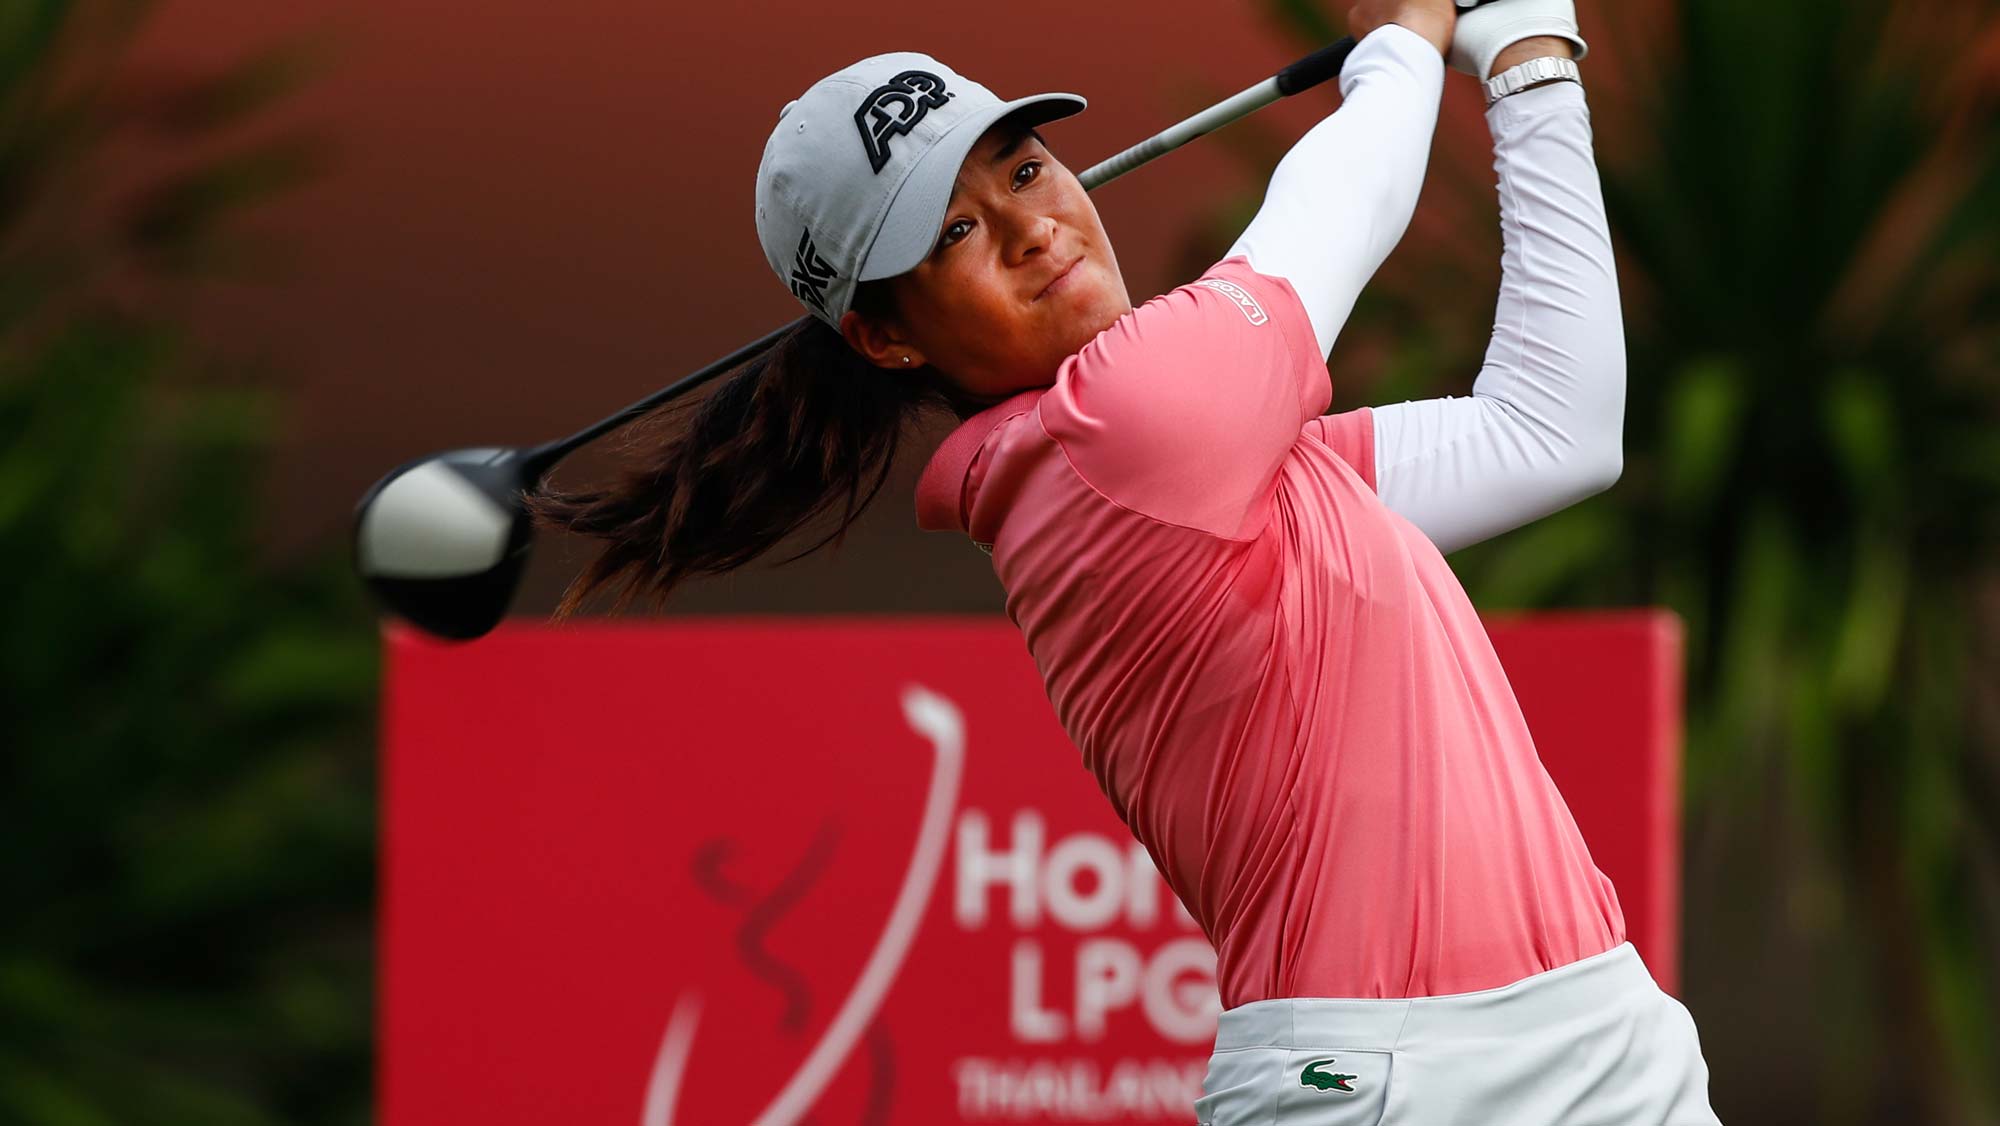 Celine Boutier of France tees off on the 1st hole during the second round of Honda LPGA Thailand